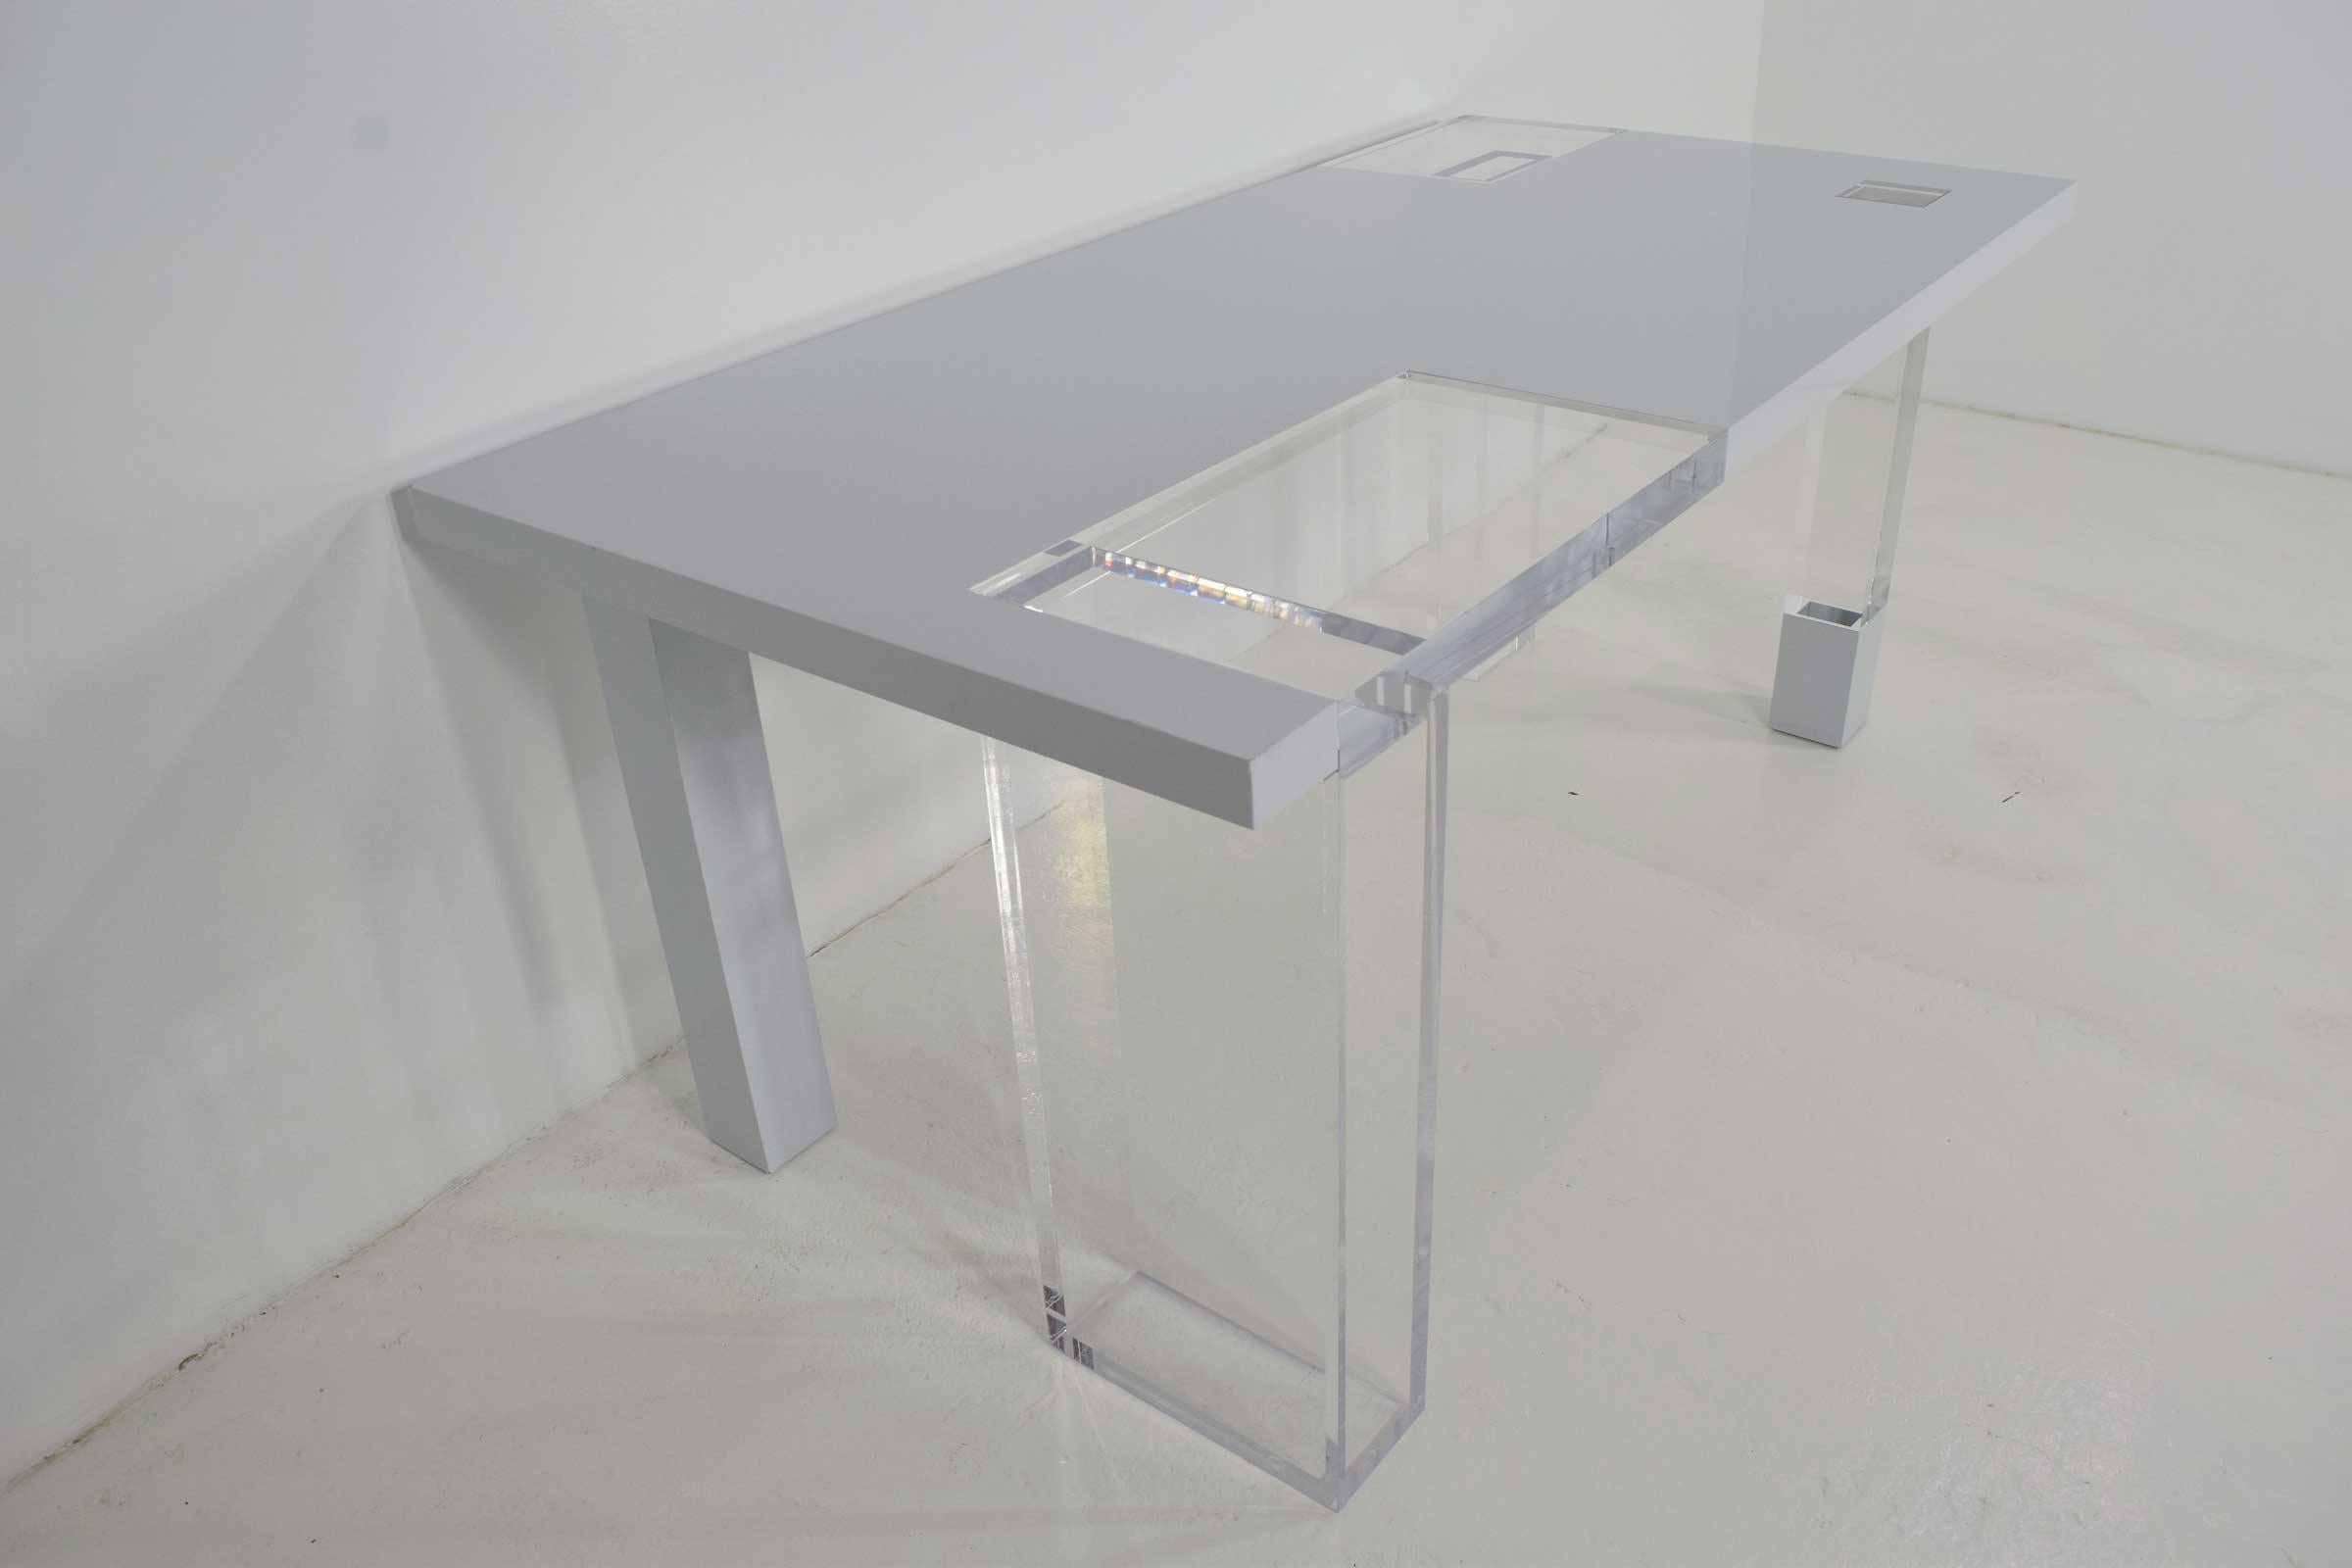 A beautiful Lucite and white lacquer table. Ideal for a work table, entry table or display table. Can also be used as a desk or dining table but check height. This table was likely a custom piece and is signed by the designer/maker. It is very heavy